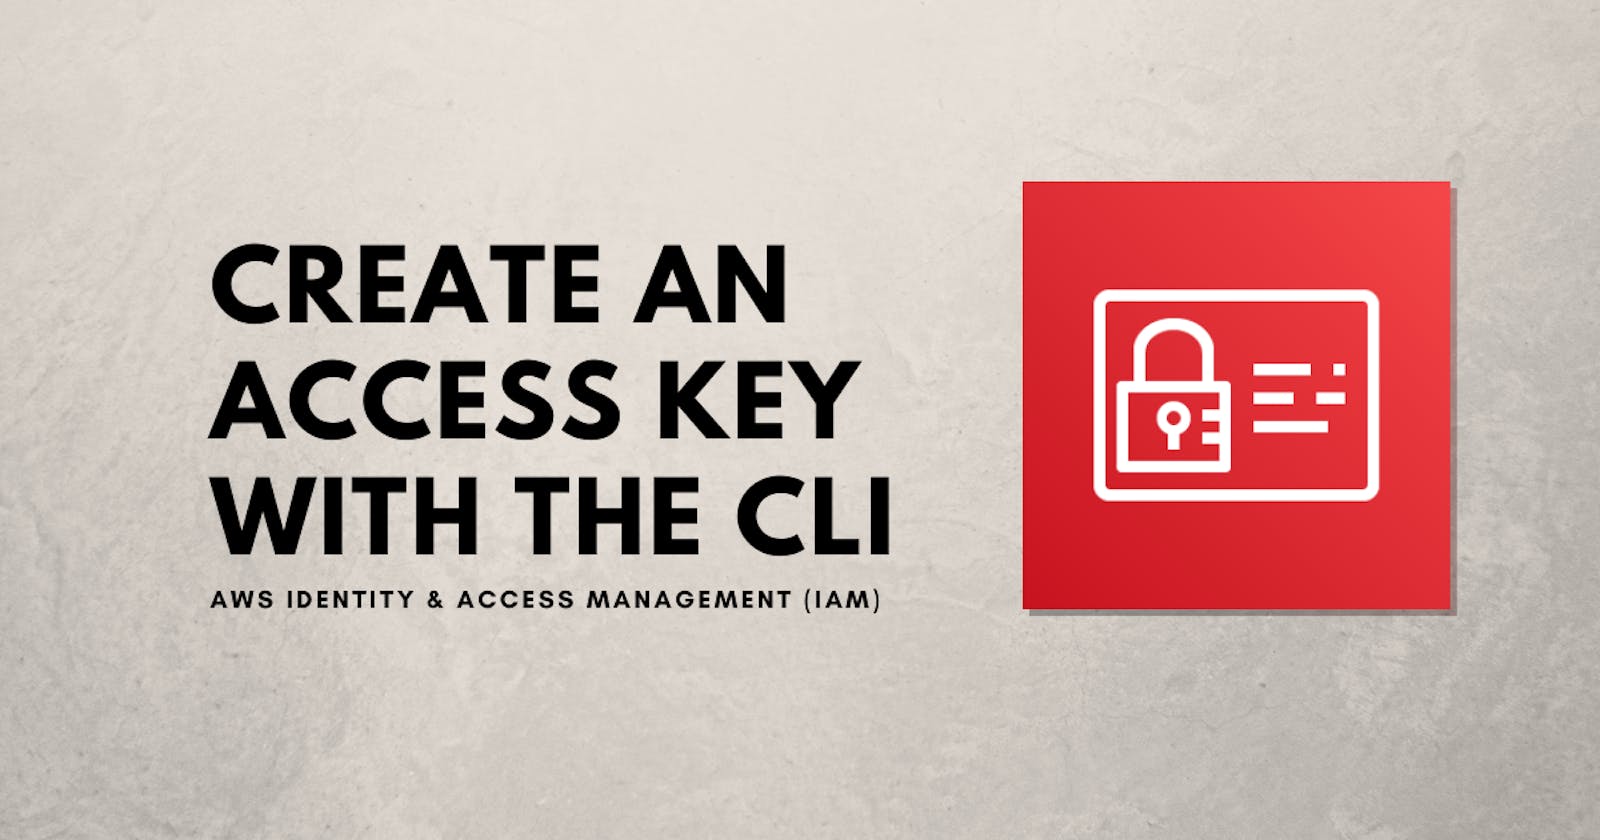 How to create a secret access key for an AWS IAM user with the CLI